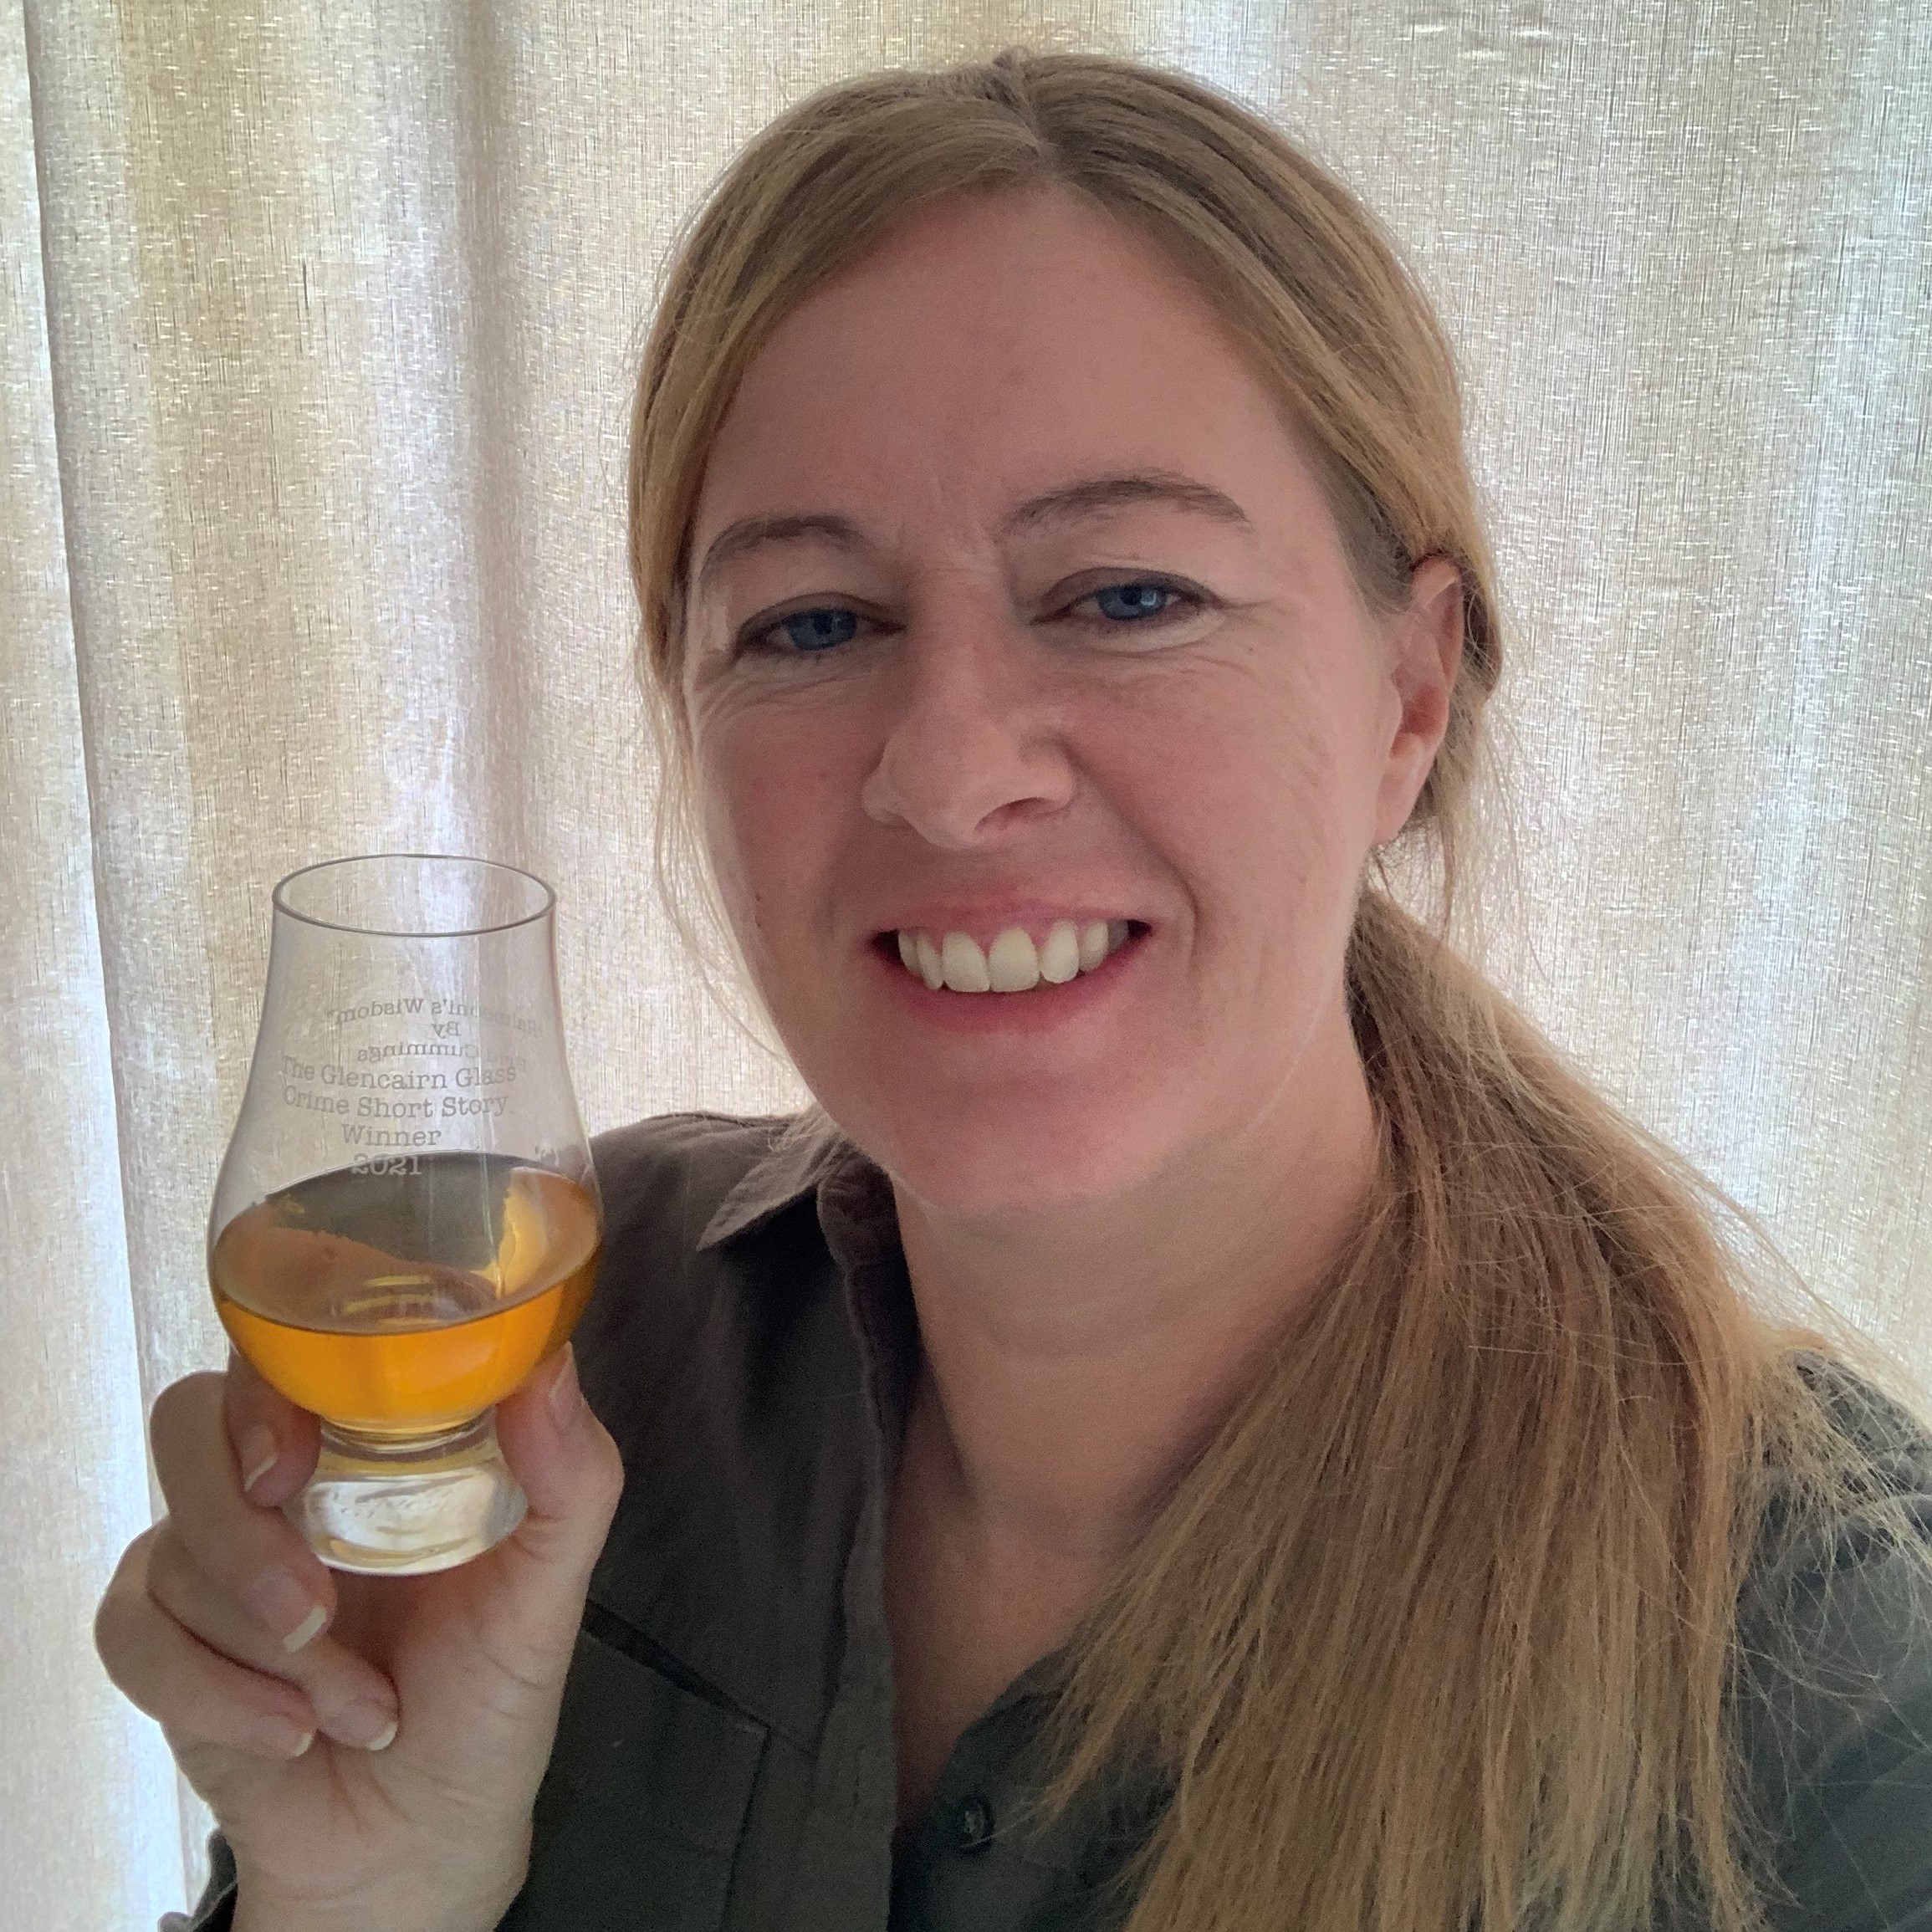 Brid Cummings, author of Halmeoni's Wisdon and winner of the Glencairn Glass Short Story Competition